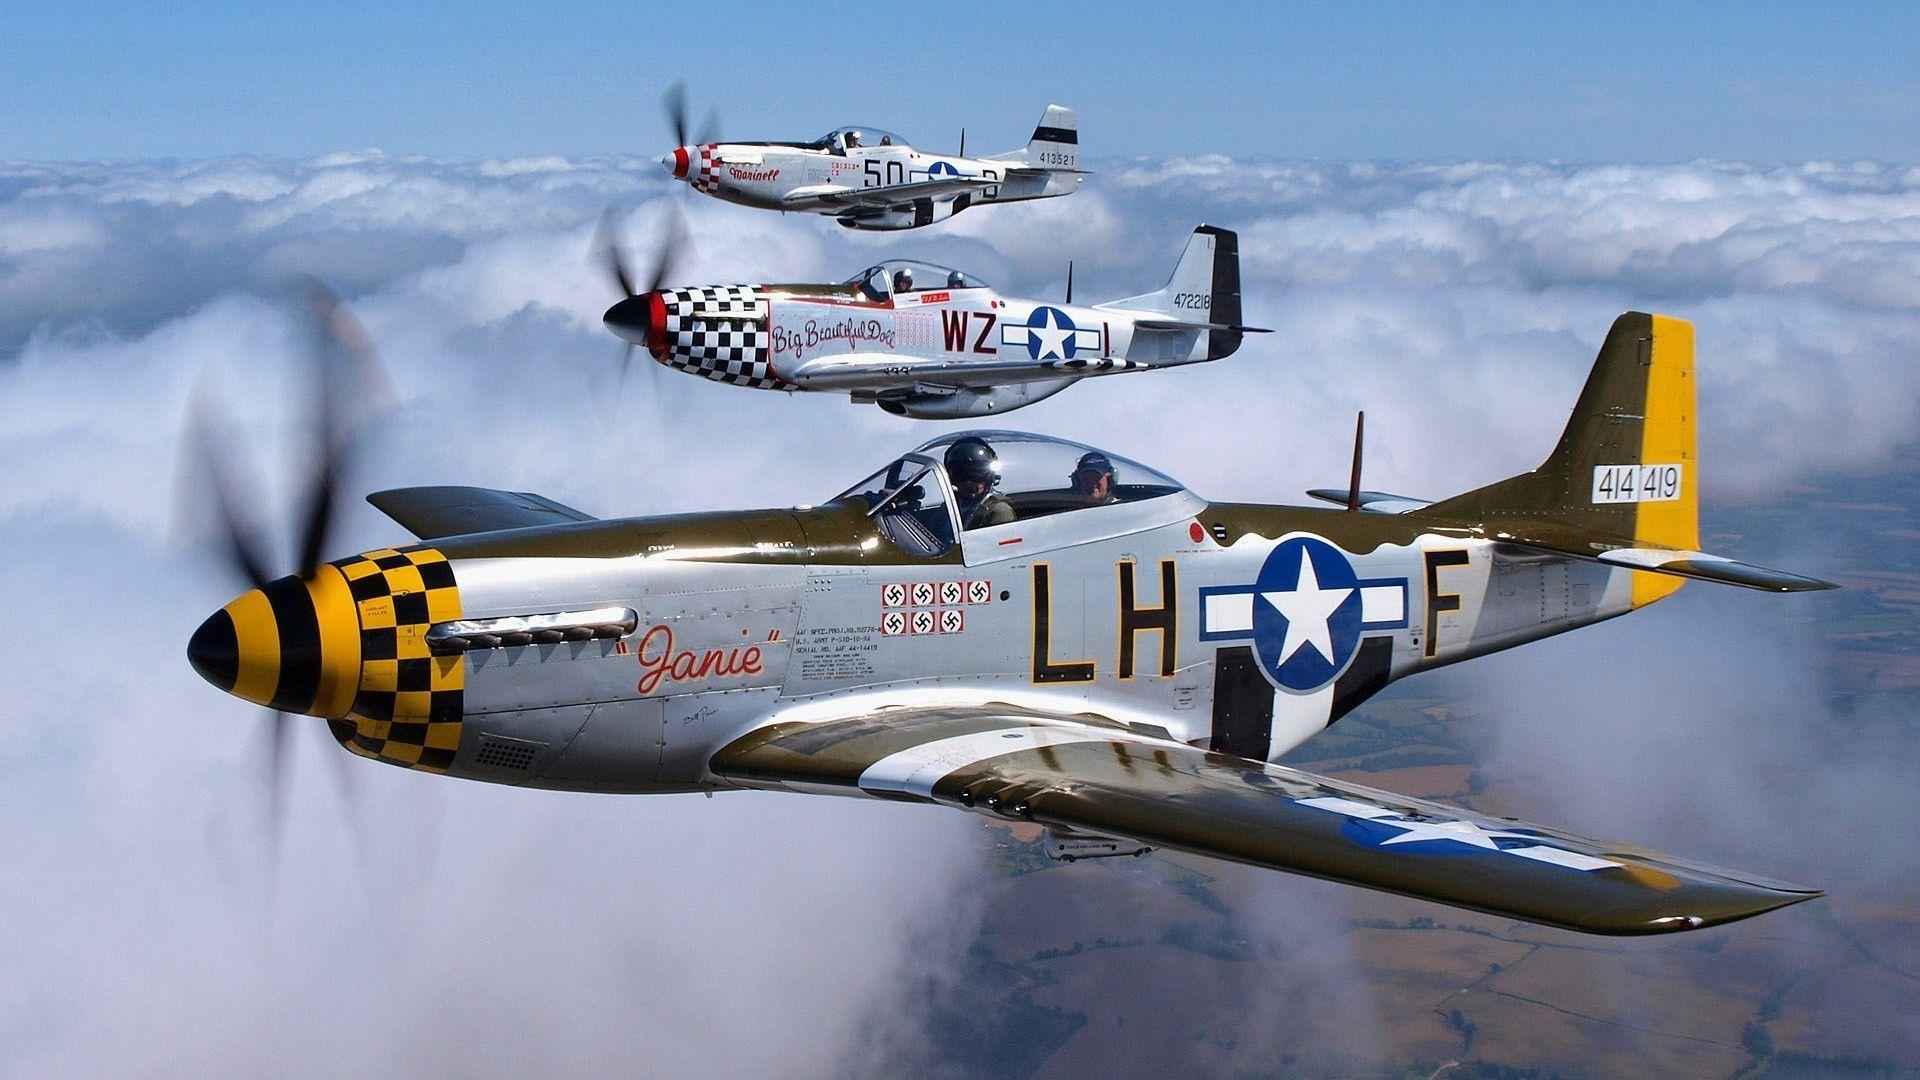 P 51 Mustang Wallpapers Hd Backgrounds Wallpapers 27 HD Wallpapers.